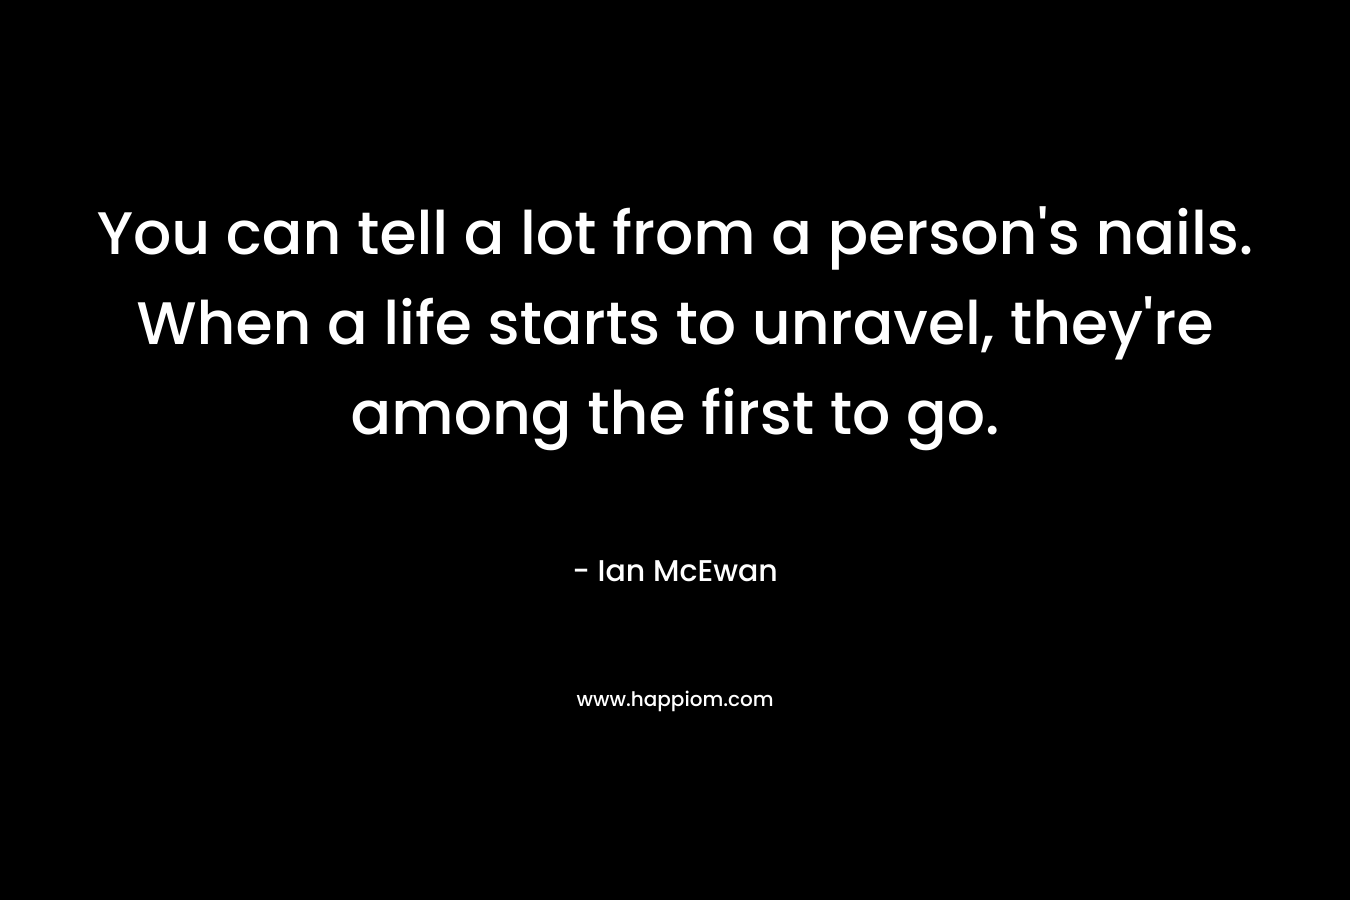 You can tell a lot from a person’s nails. When a life starts to unravel, they’re among the first to go. – Ian McEwan